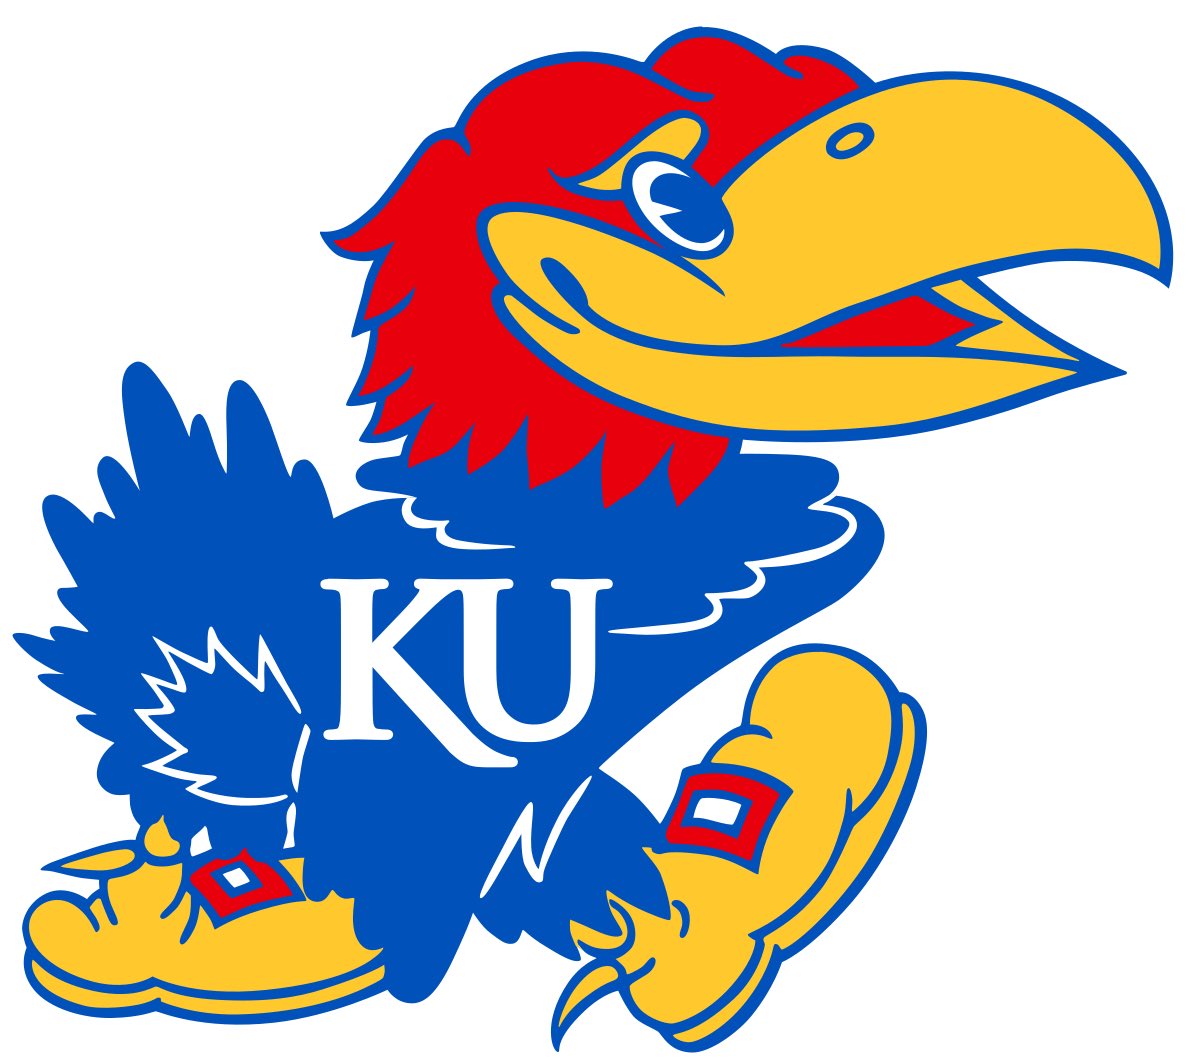 Blessed and honored to receive a offer from the University of Kansas @KU_Football @CoachTSamuel @SOCGoldenBearFB @SOCFootball1